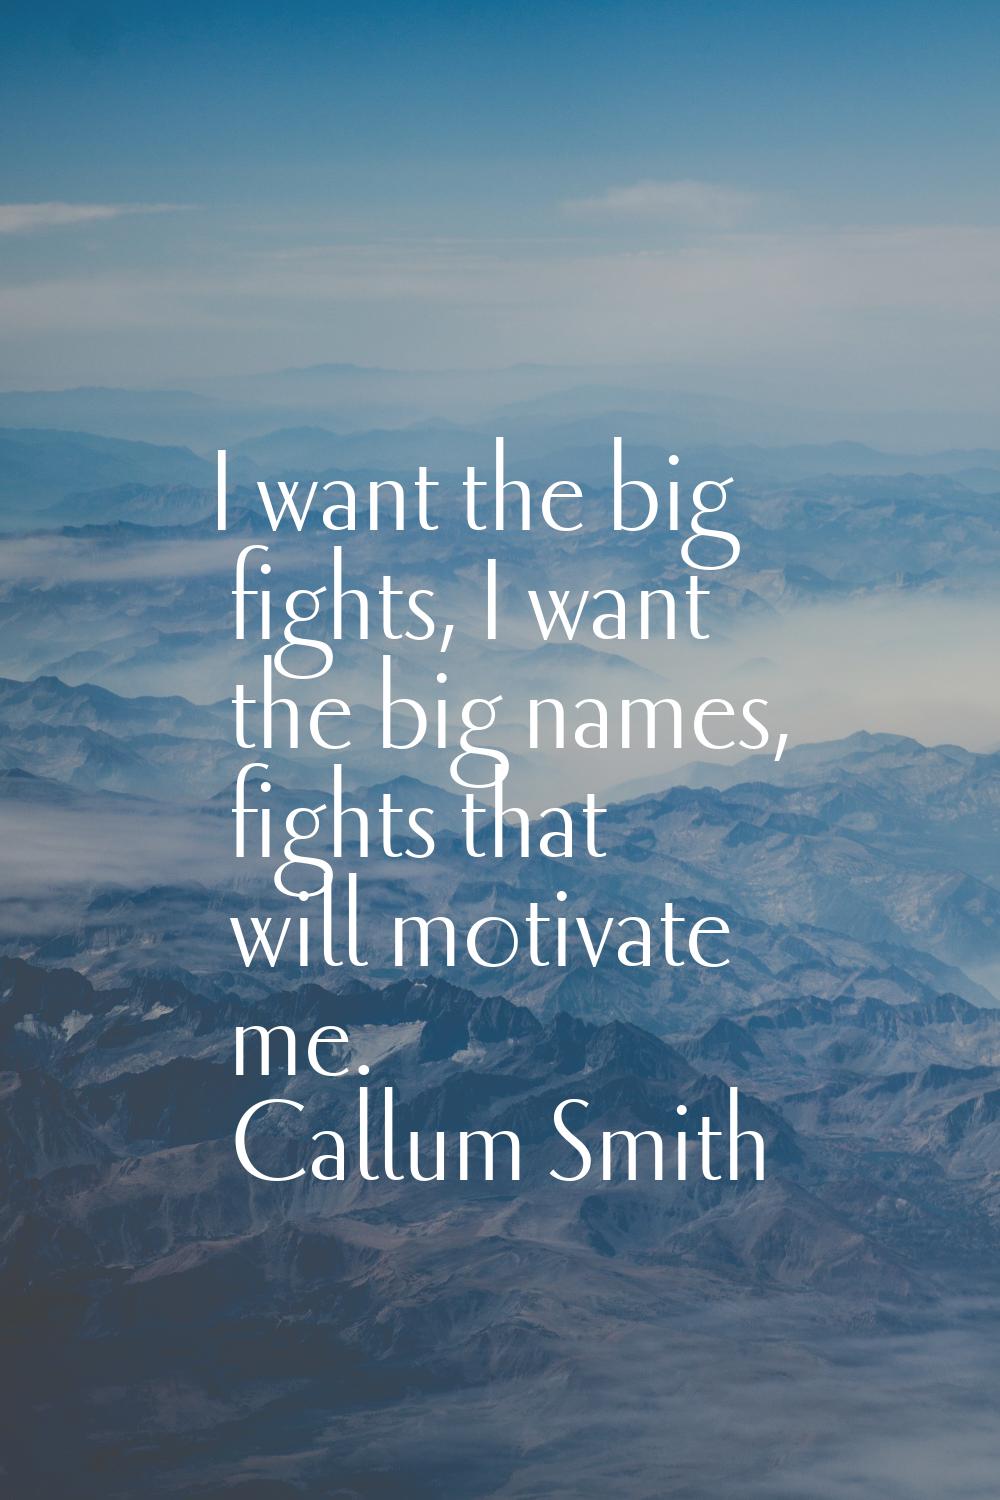 I want the big fights, I want the big names, fights that will motivate me.